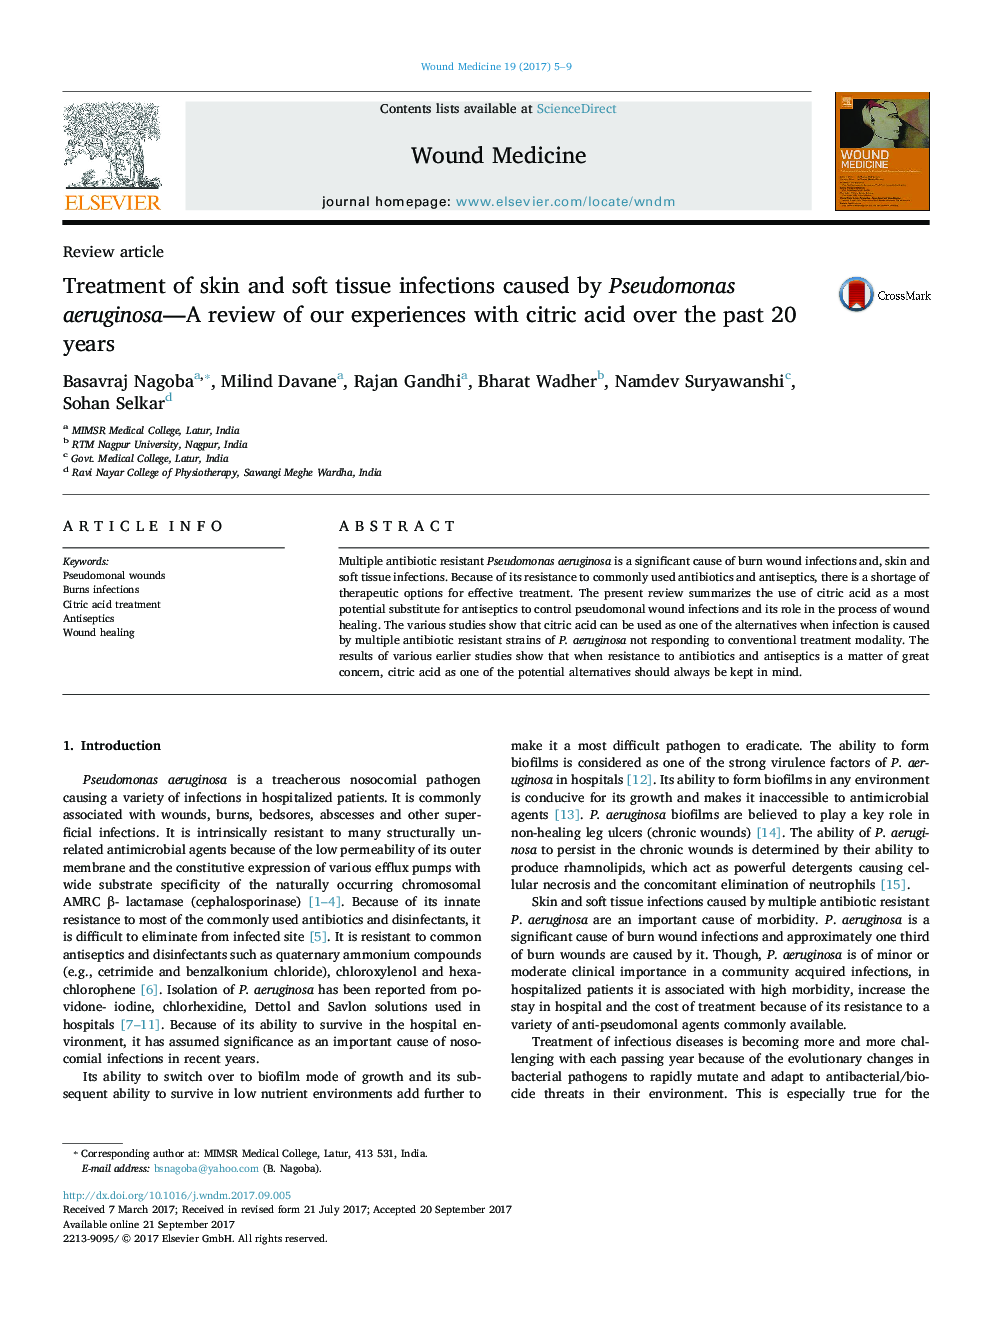 Treatment of skin and soft tissue infections caused by Pseudomonas aeruginosa-A review of our experiences with citric acid over the past 20 years